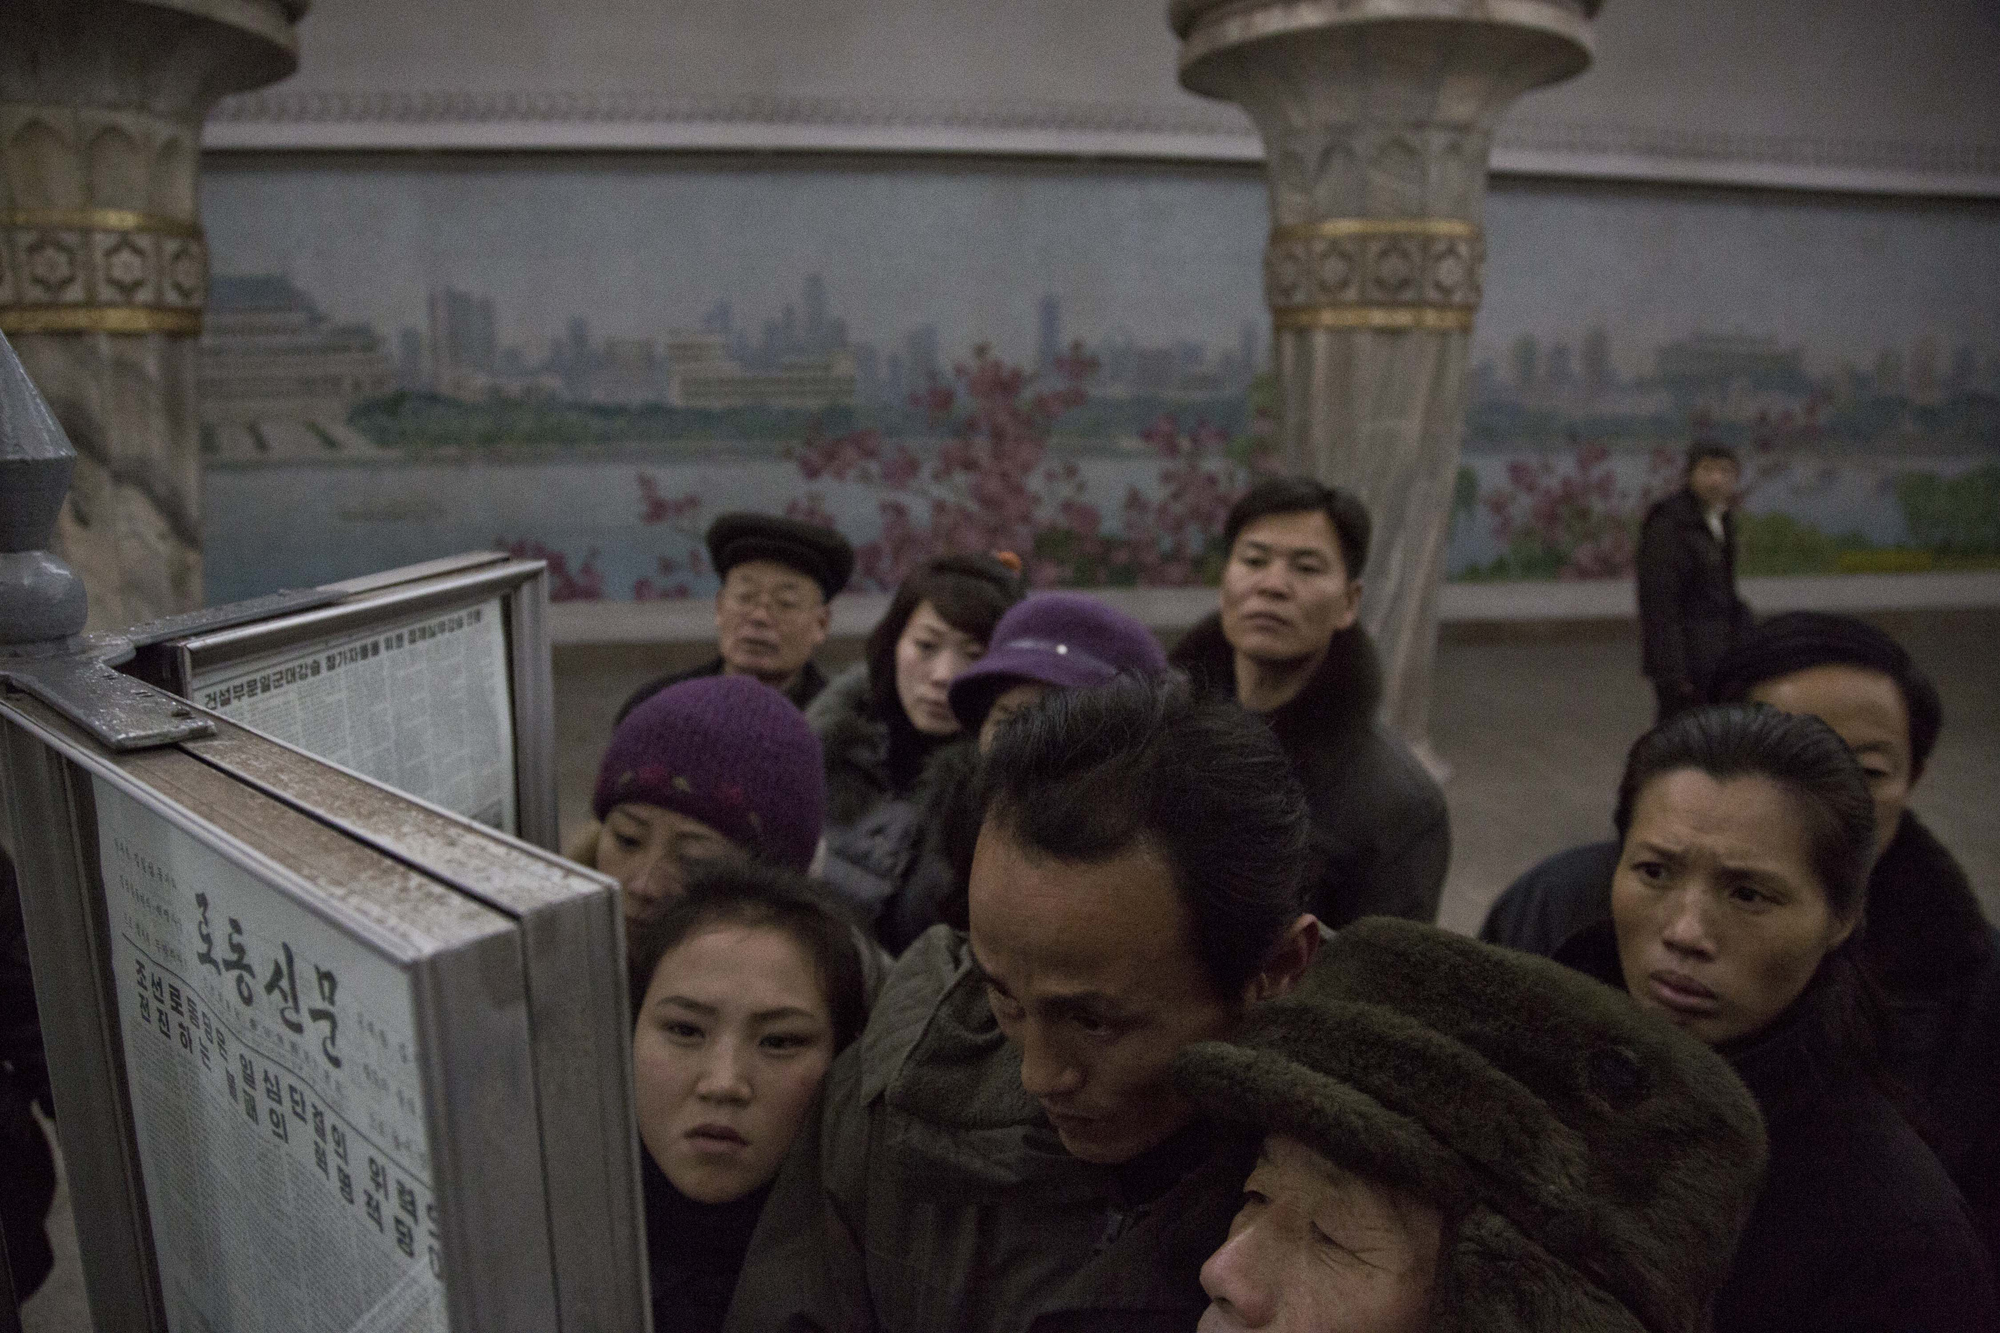 North Korean subway commuters gather around a public newspaper stand on the train platform in Pyongyang, North Korea,  Dec. 13, 2013 to read the headlines about Jang Song Thaek, North Korean leader Kim Jong Un's uncle who was executed as a traitor.